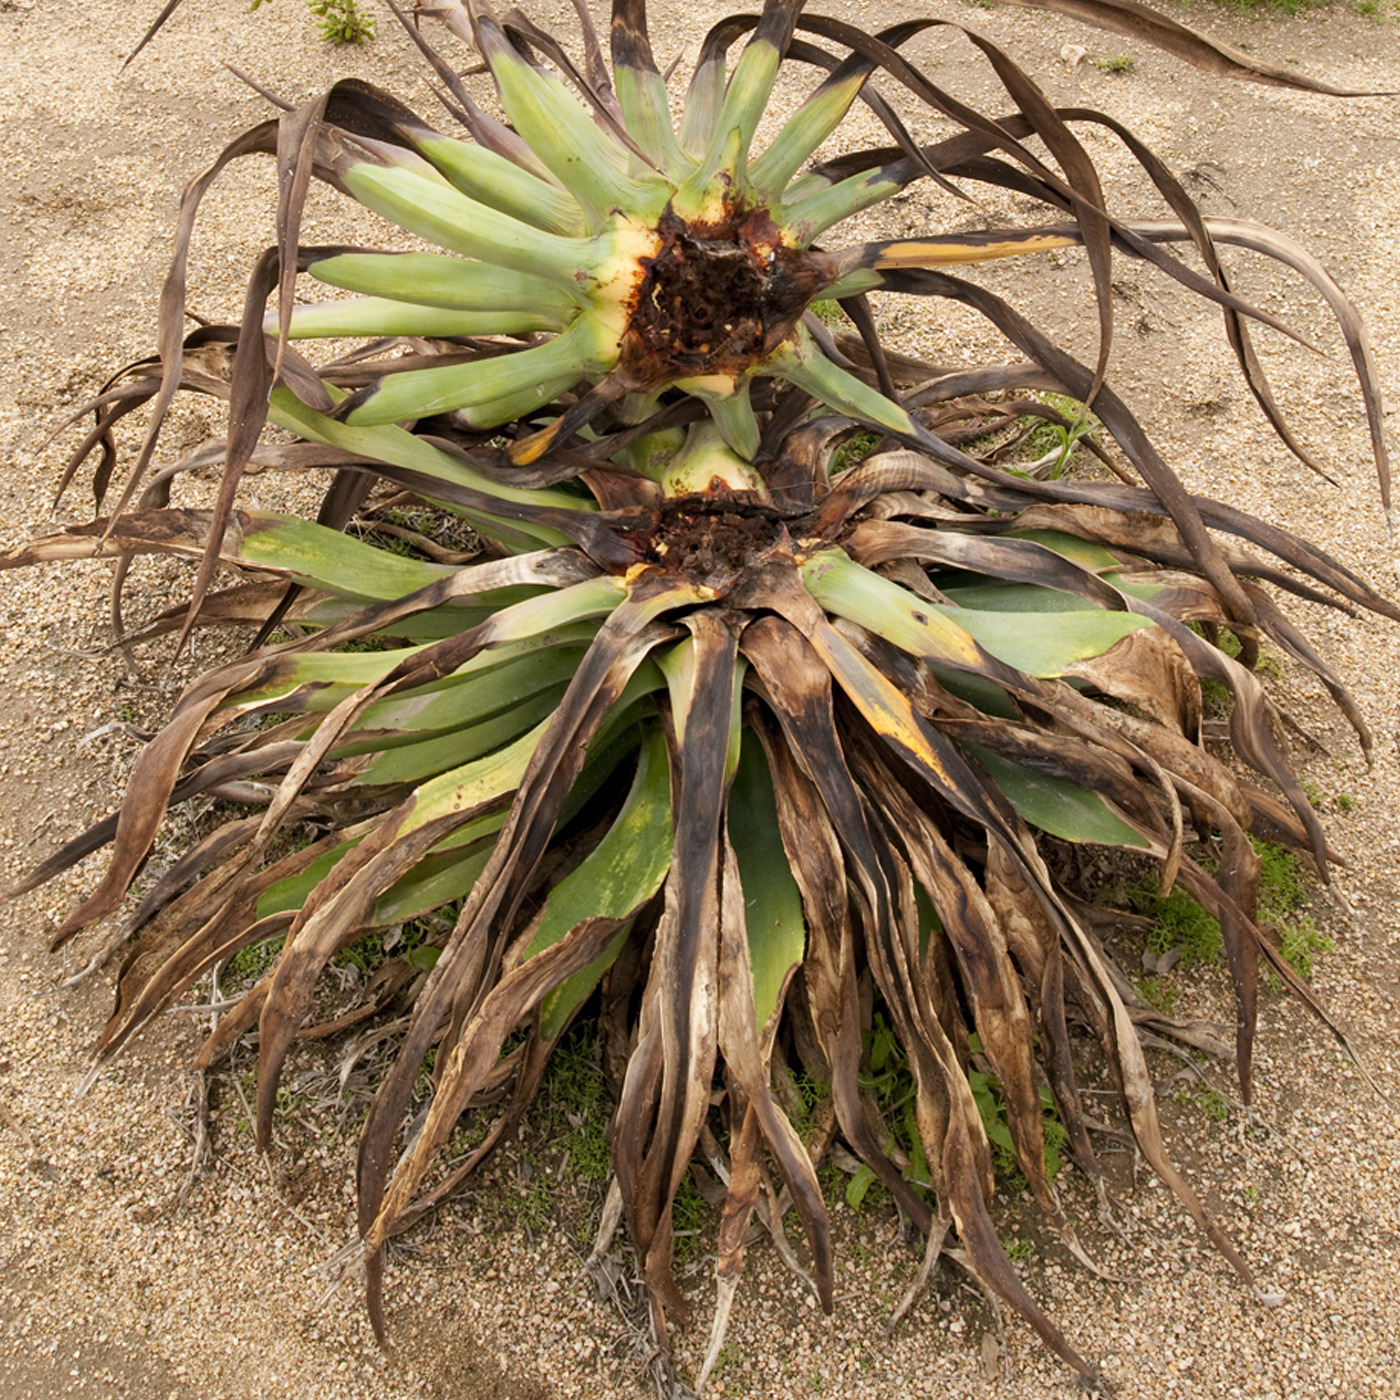 Rotten Agave Plant